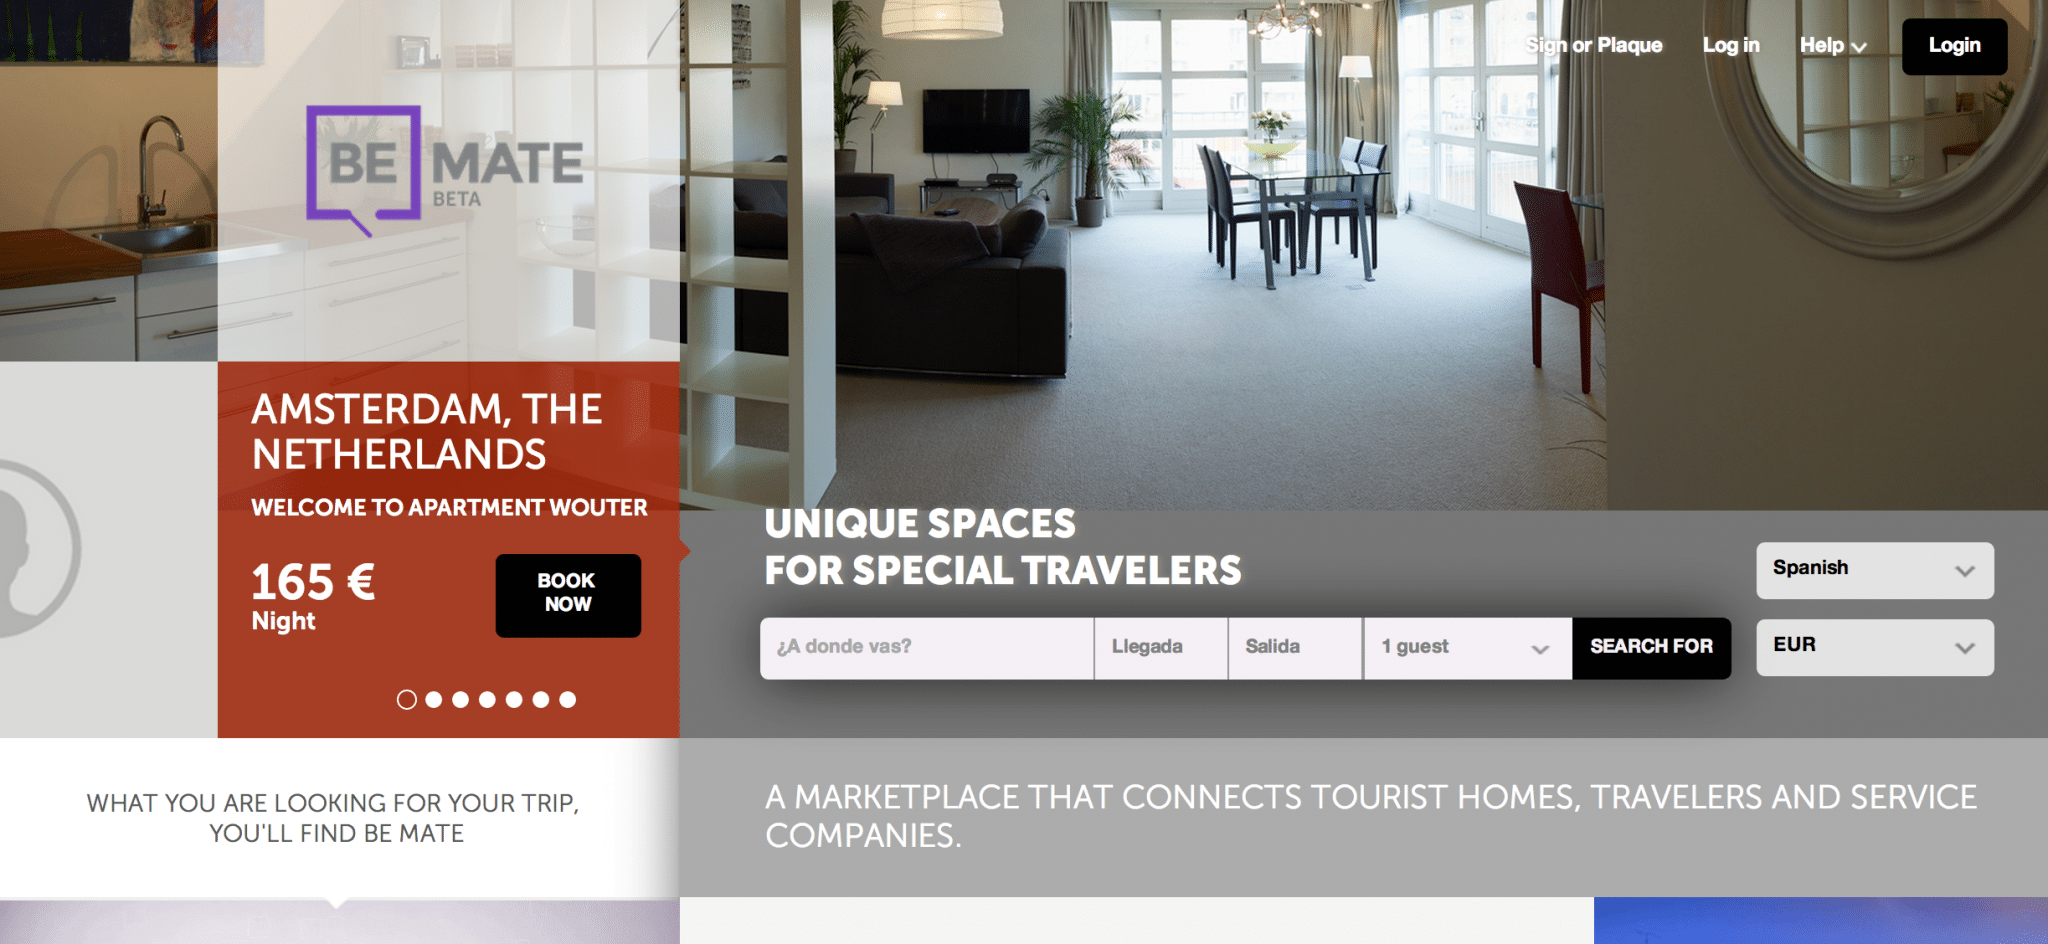 Room Mate Hotels launched BeMate, a site travelers can use to book an an apartment stay and get all the services and amenities Room Mate offers.